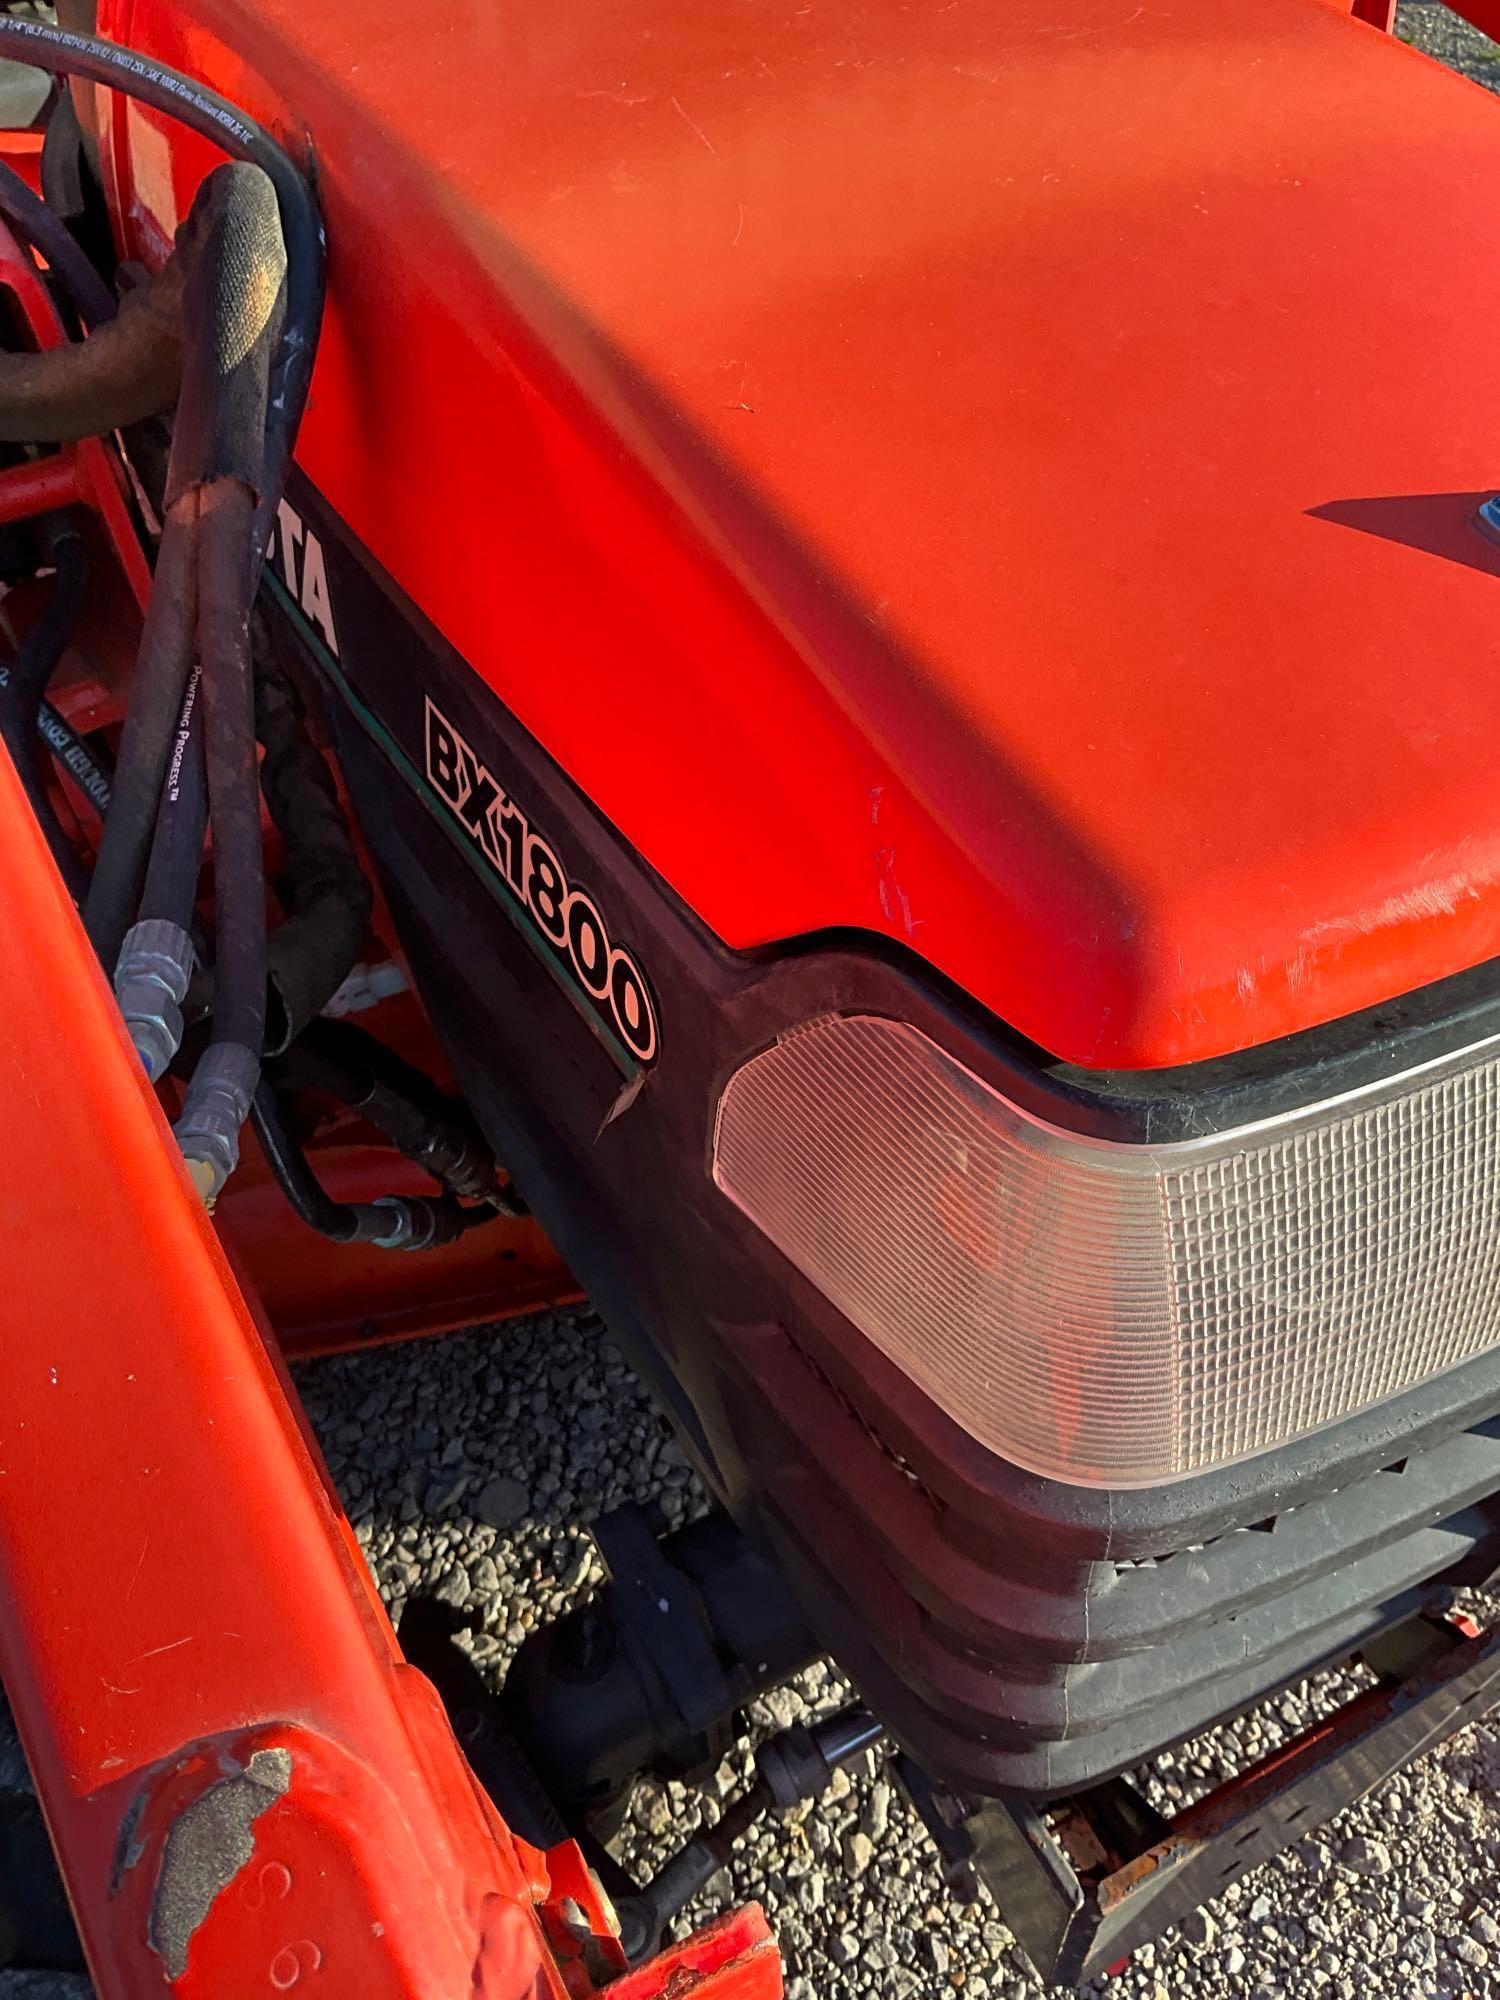 Kubota compact tractor with loader